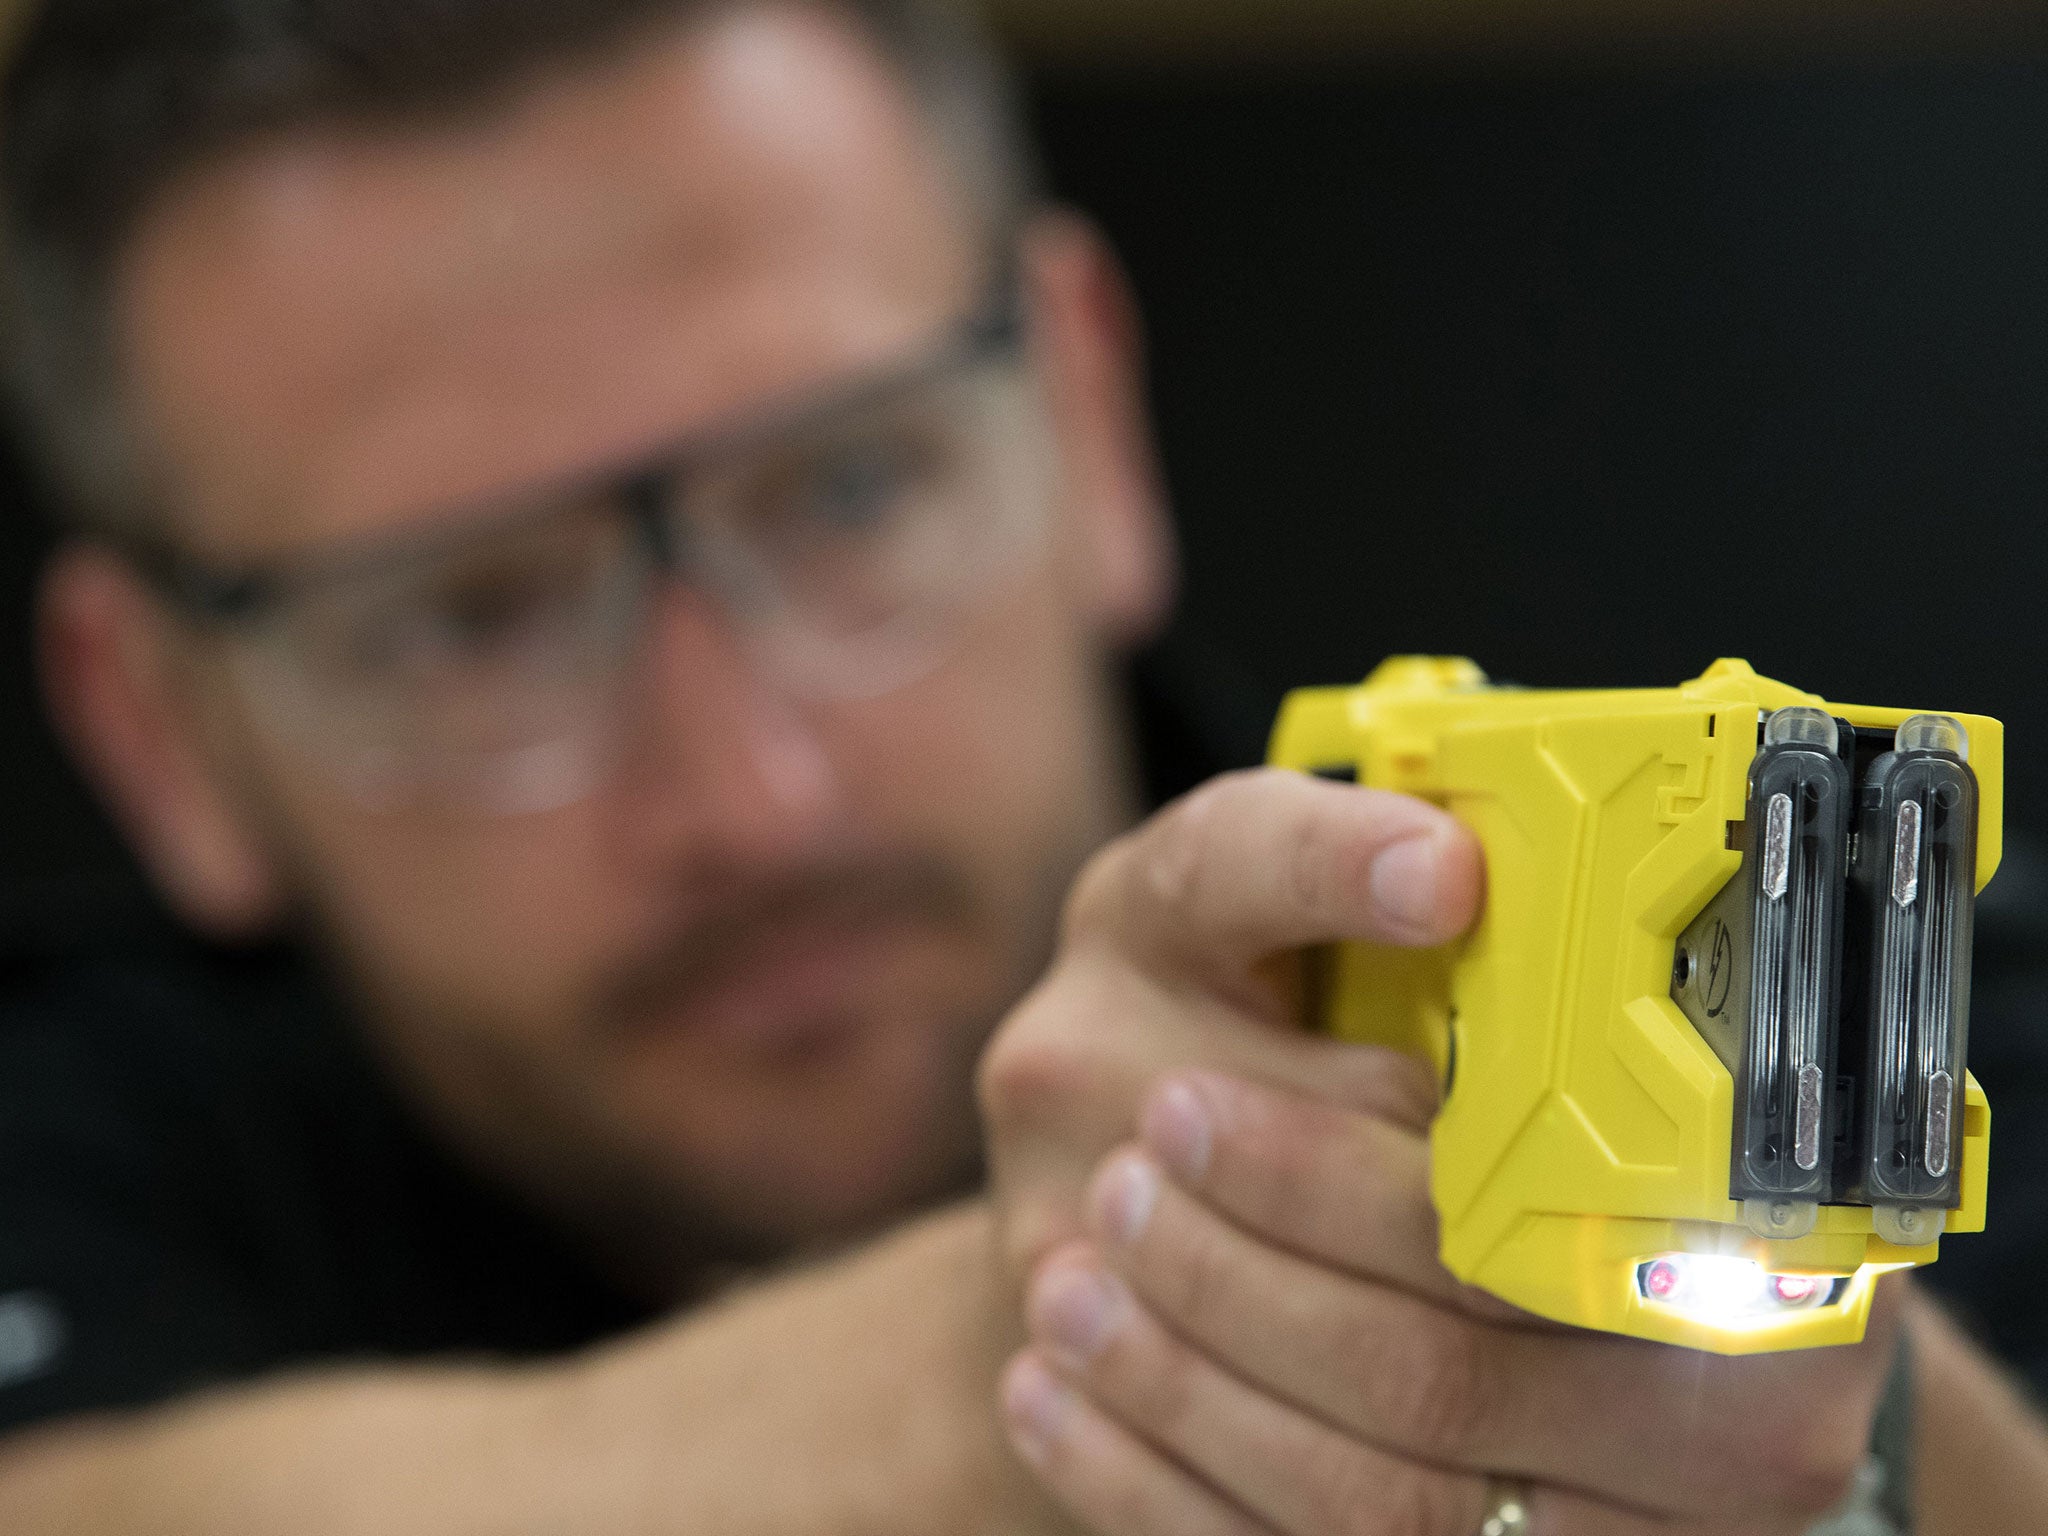 Tasers are deployed disproportionately against people of colour, campaigners say